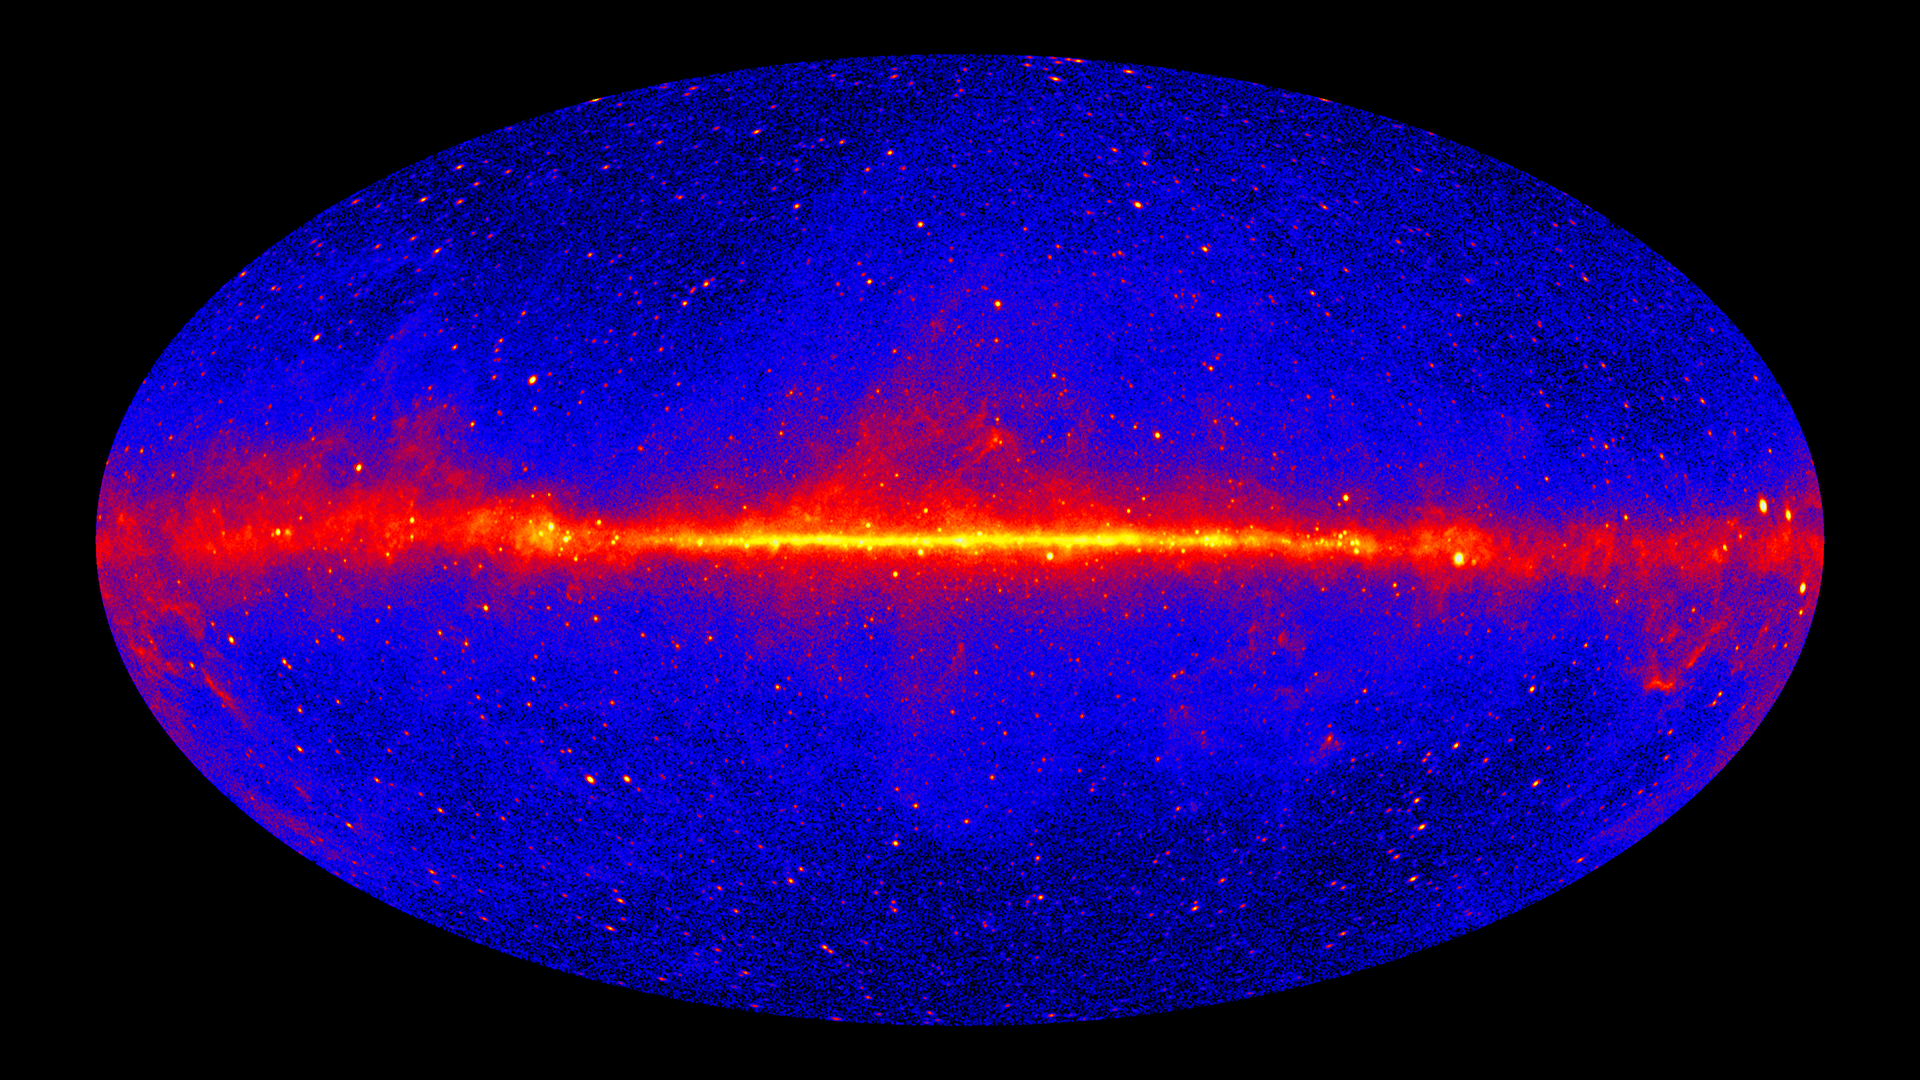 ASI - Fermi-LAT collaboration has released the updated list of cosmic gamma-ray sources to date